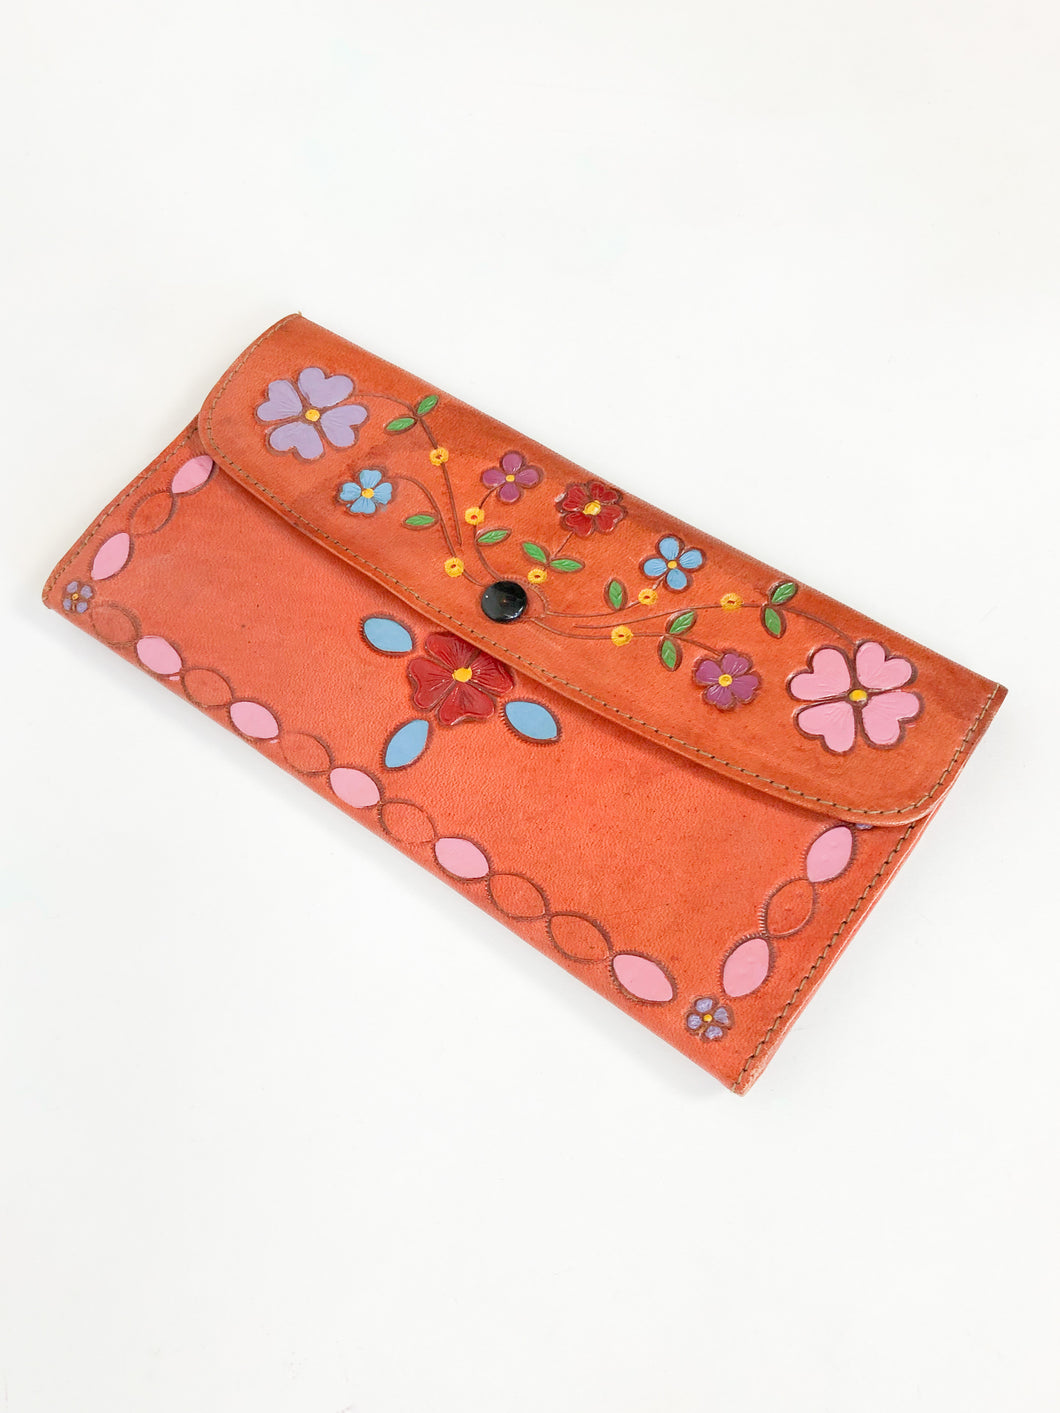 Vintage Hand Tooled Painted Wallet